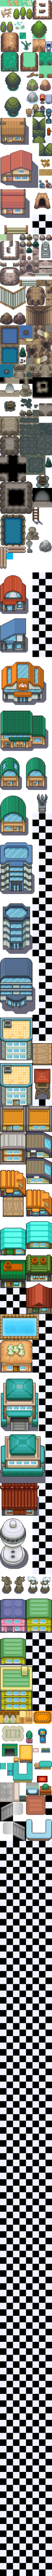 Outside_Tileset_WIP.png